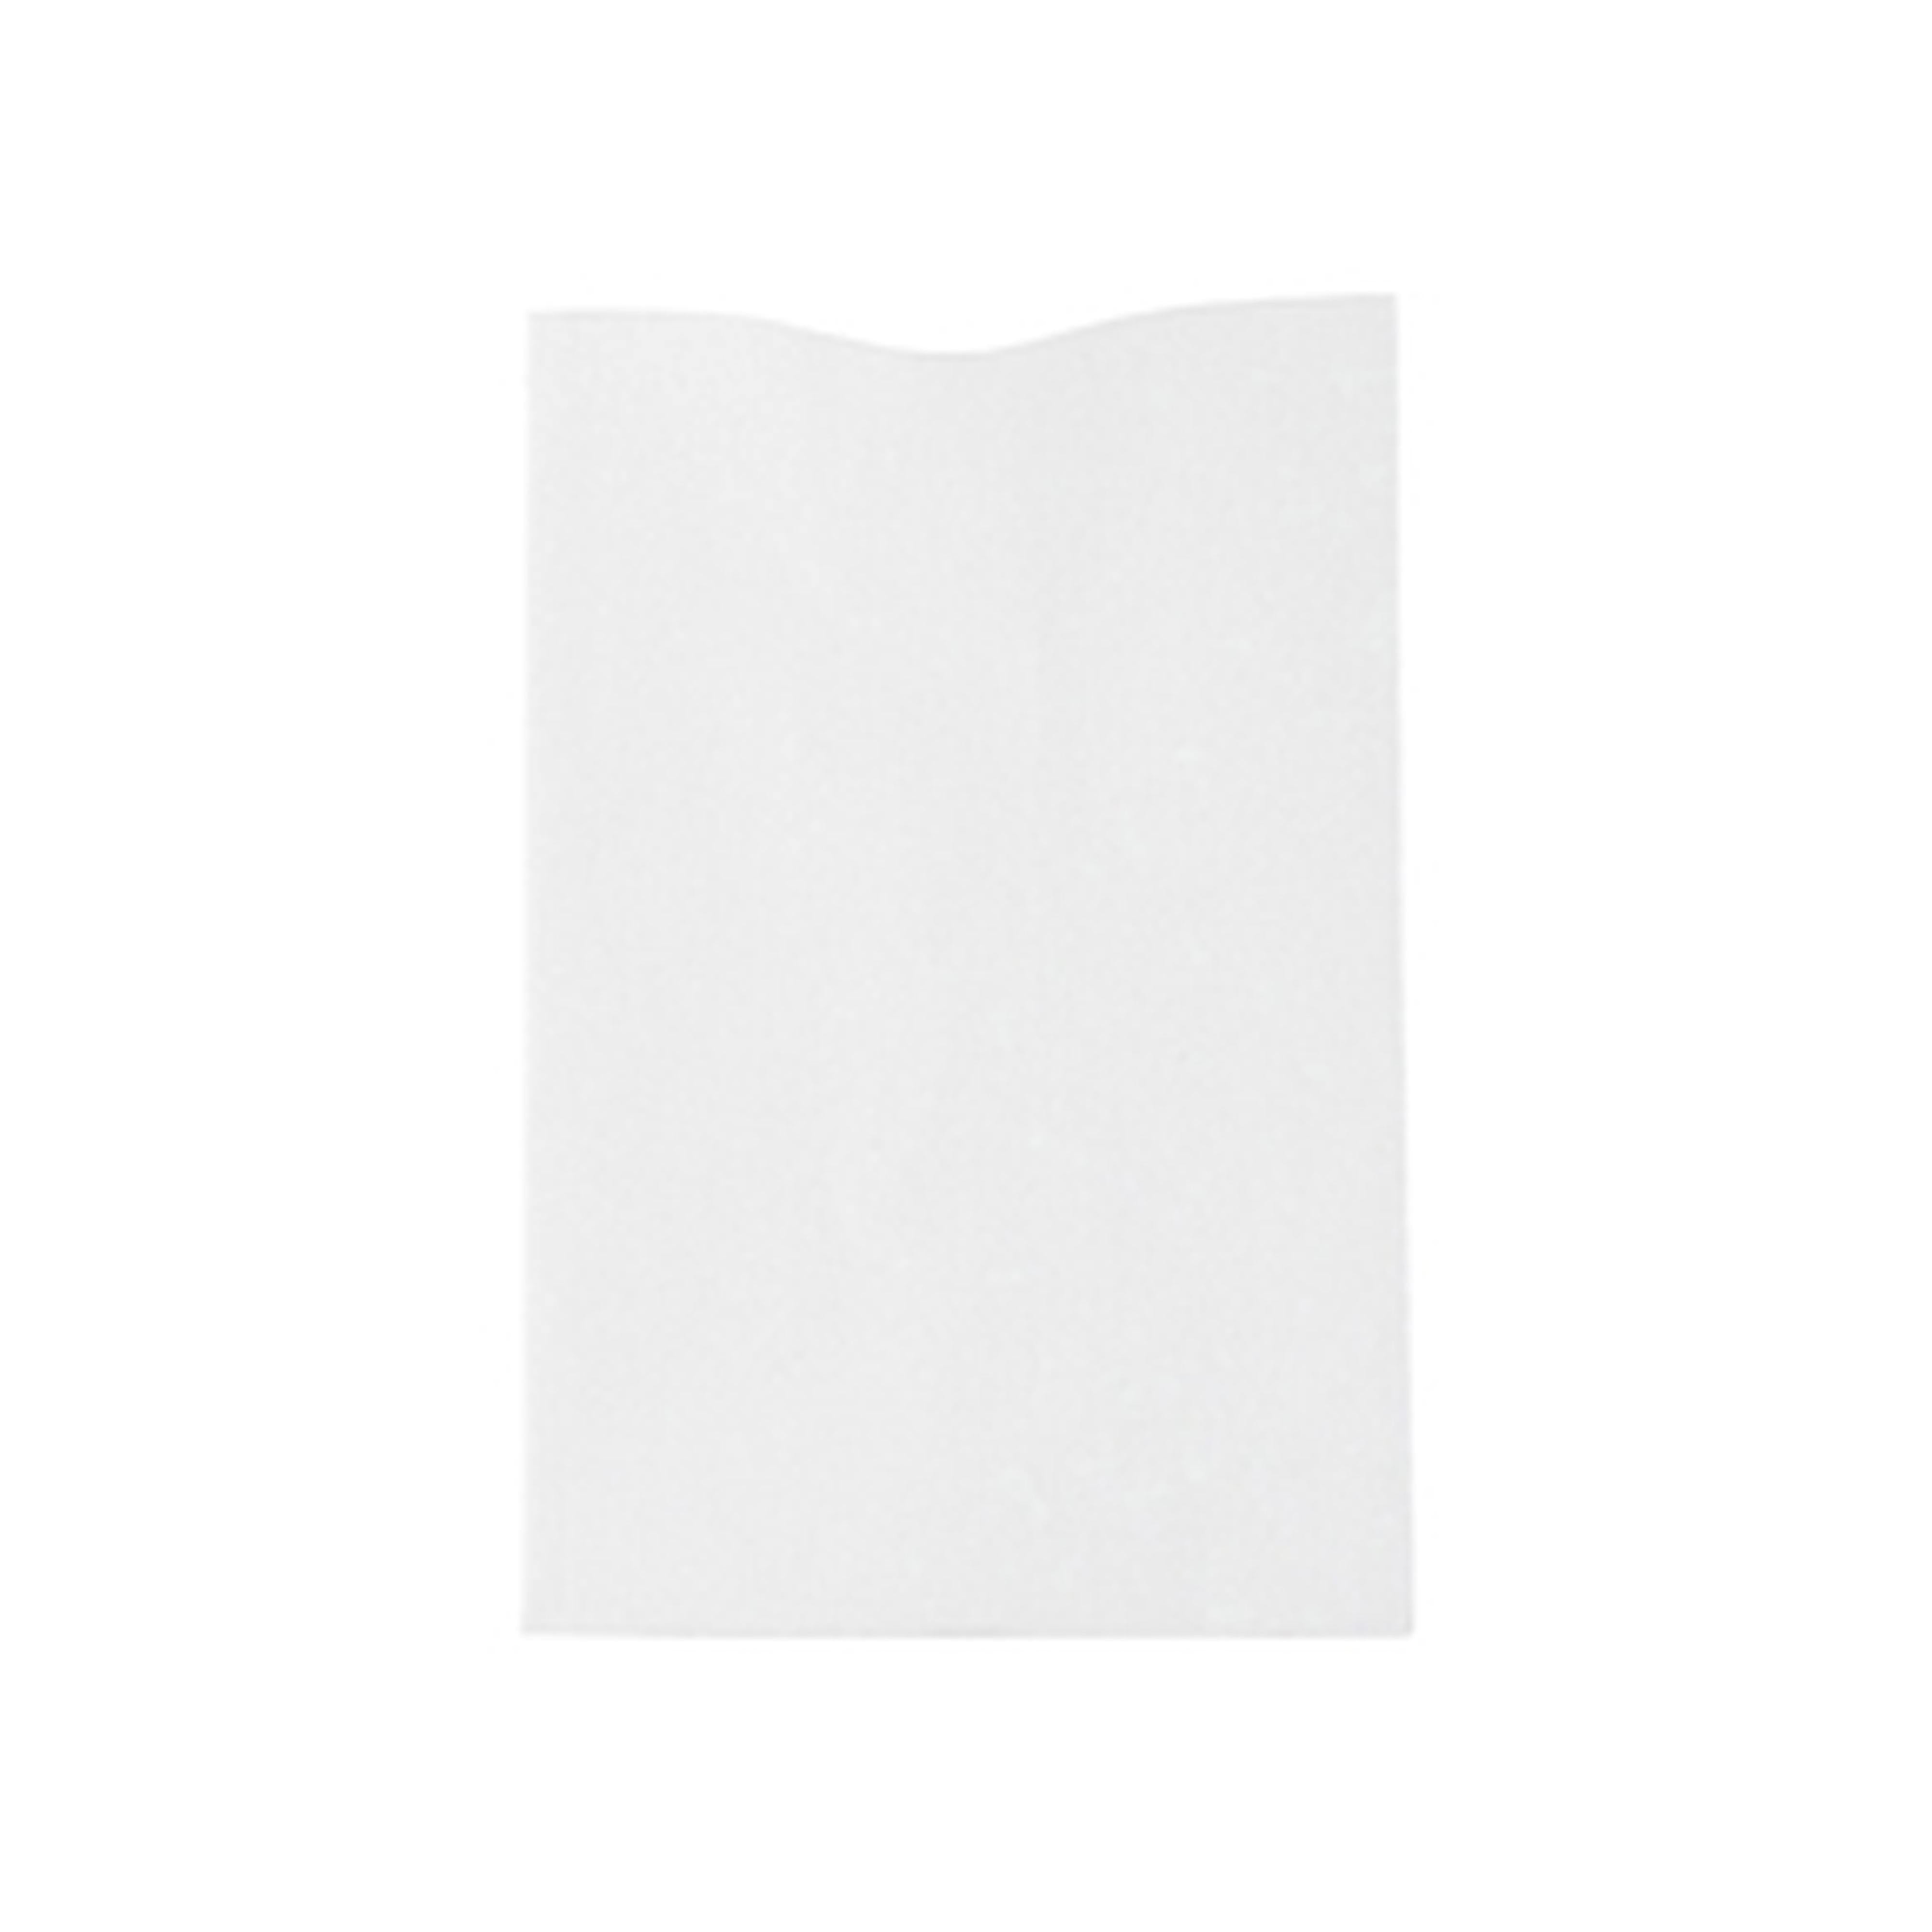 Shielded Sleeve - Blank Paper RFID Identity Protection Sleeves